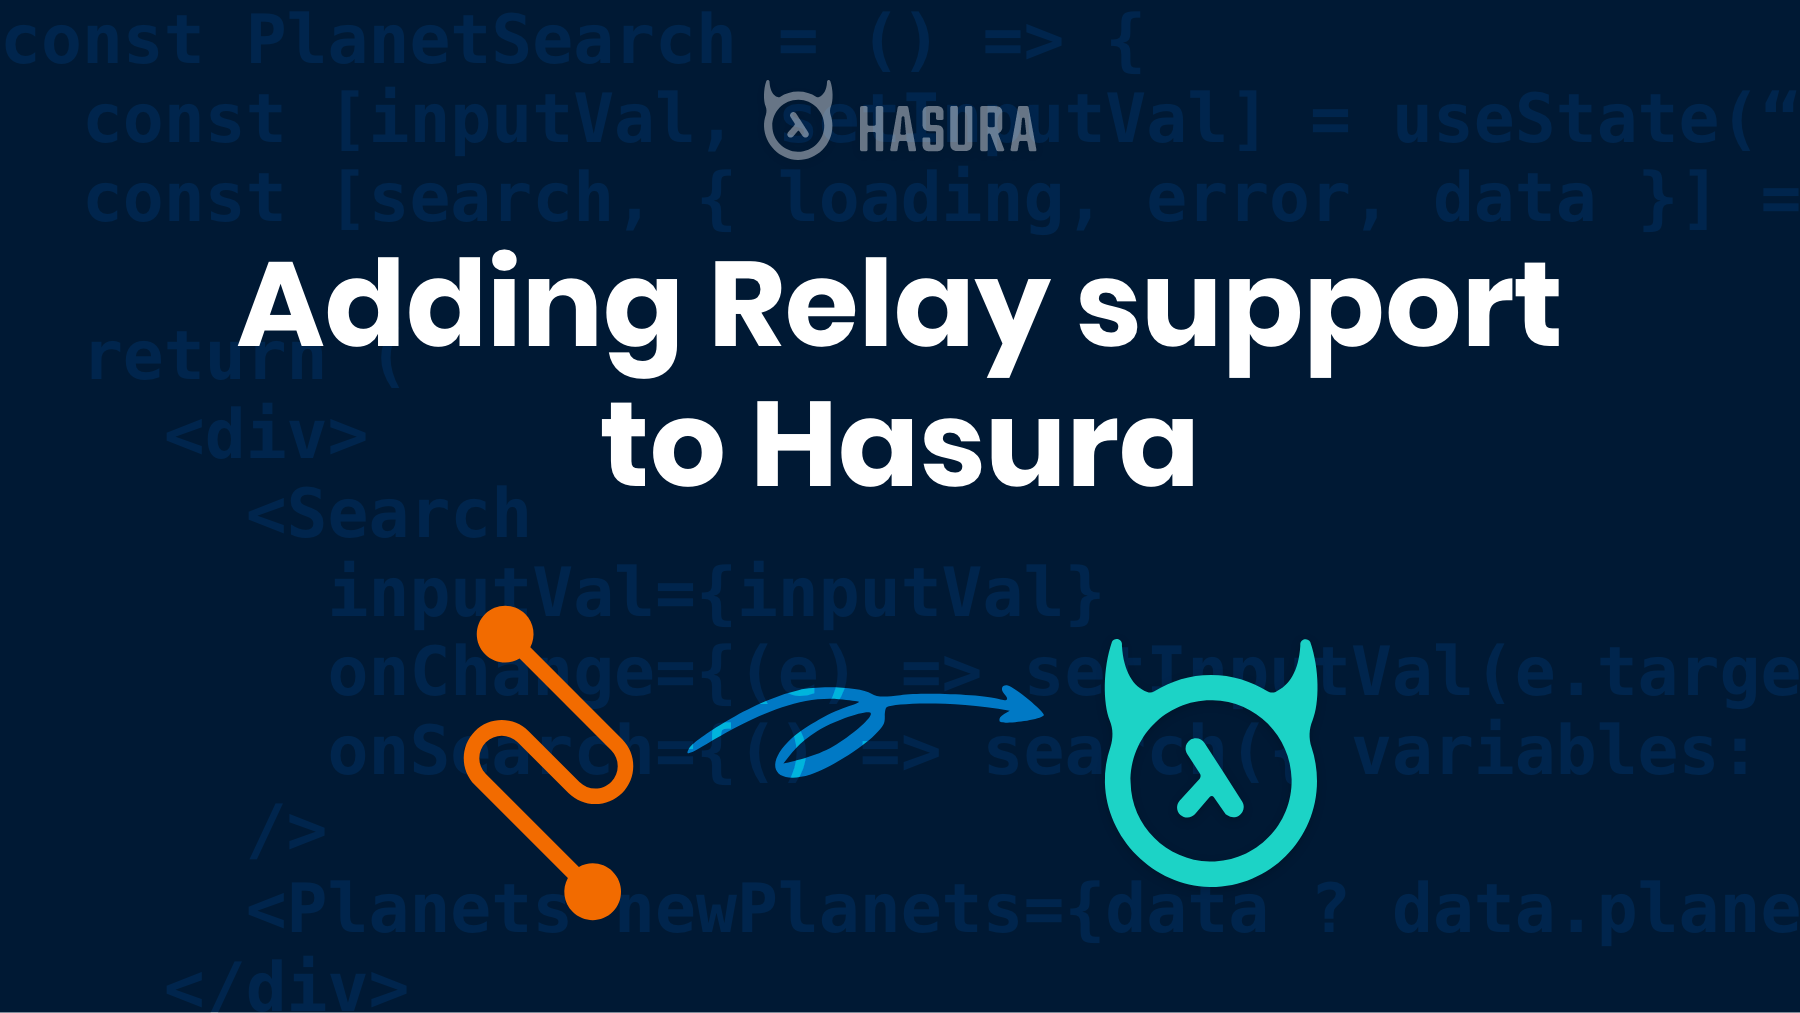 Adding Relay support to Hasura